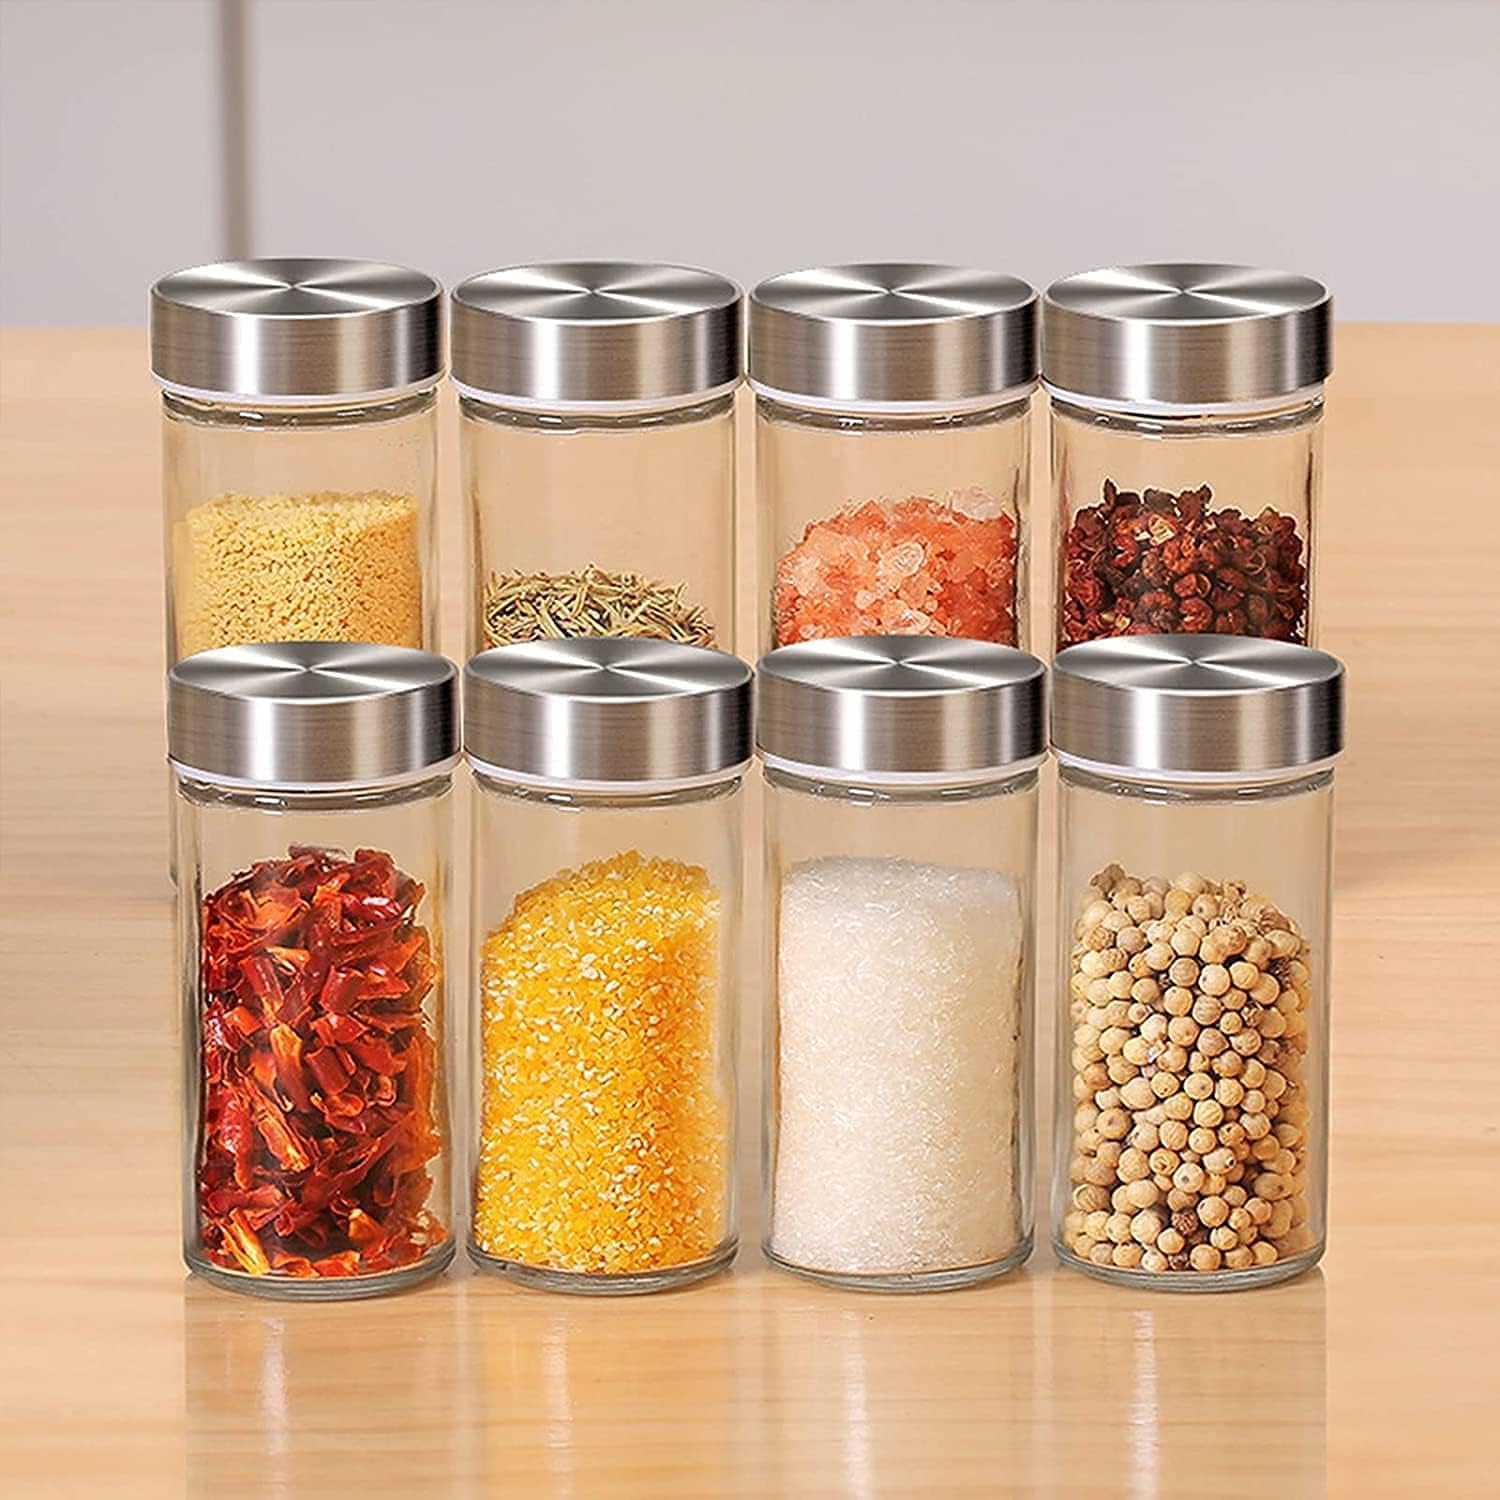 8/12 Spice Jars Carousel Stainless Steel Rotating Spice Rack for Kitchen